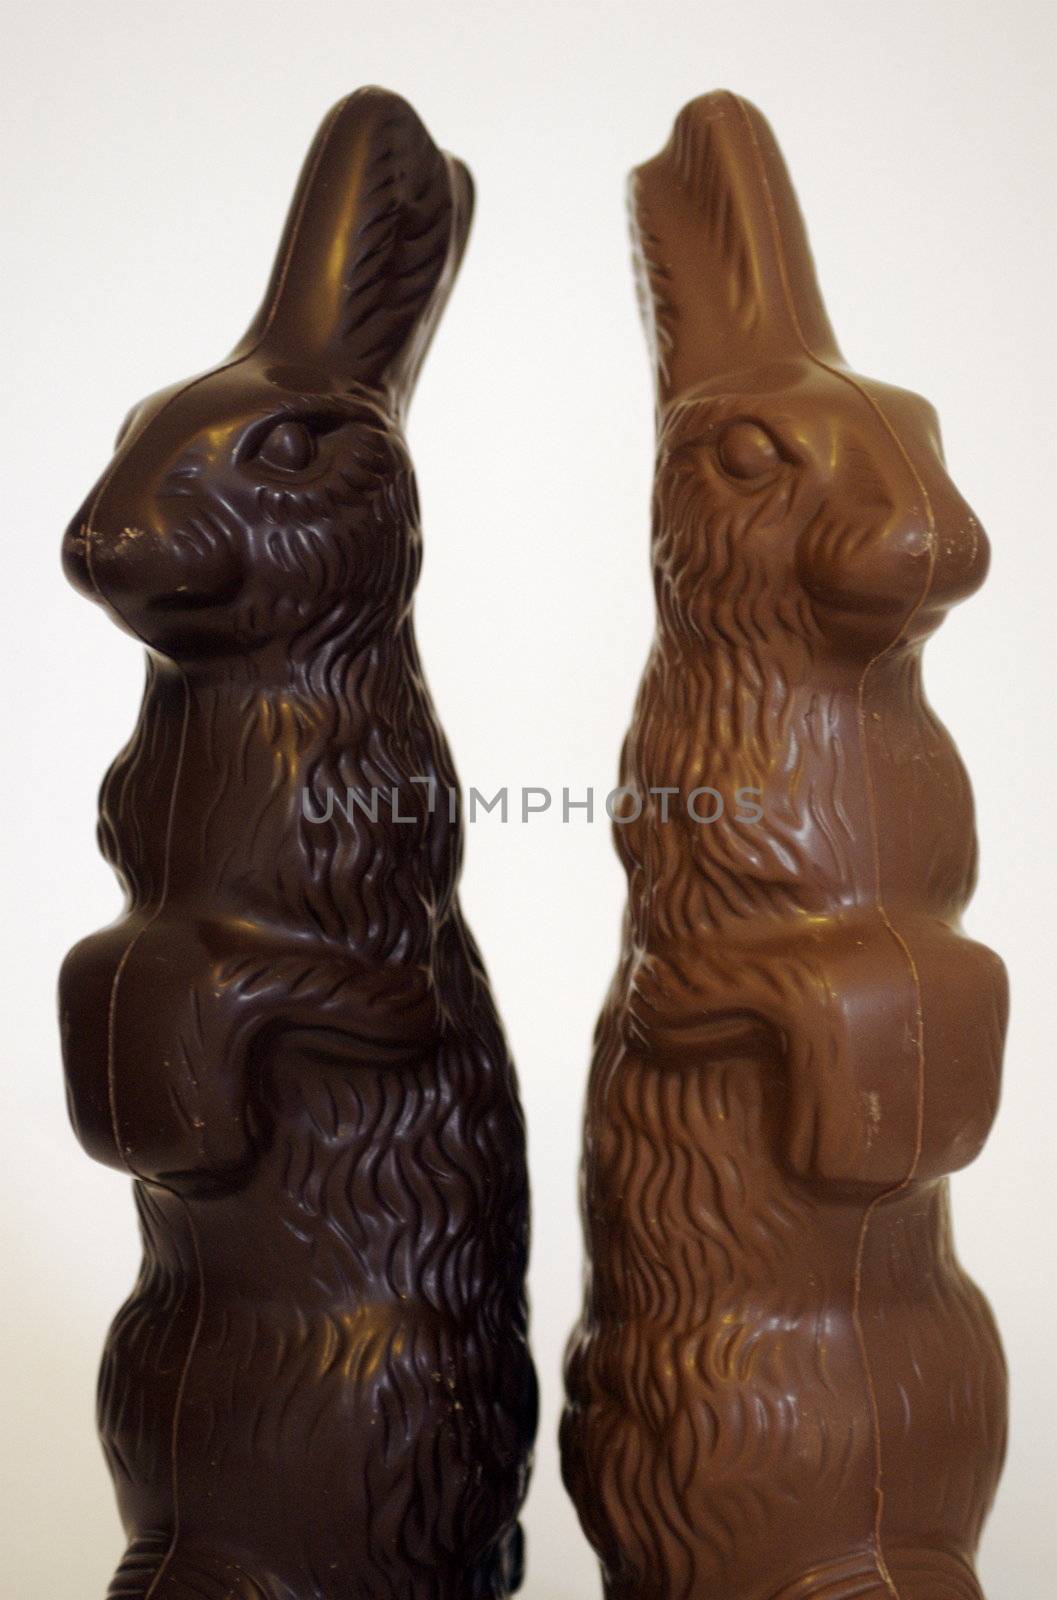 Chocolate Easter Bunnies by PrincessToula